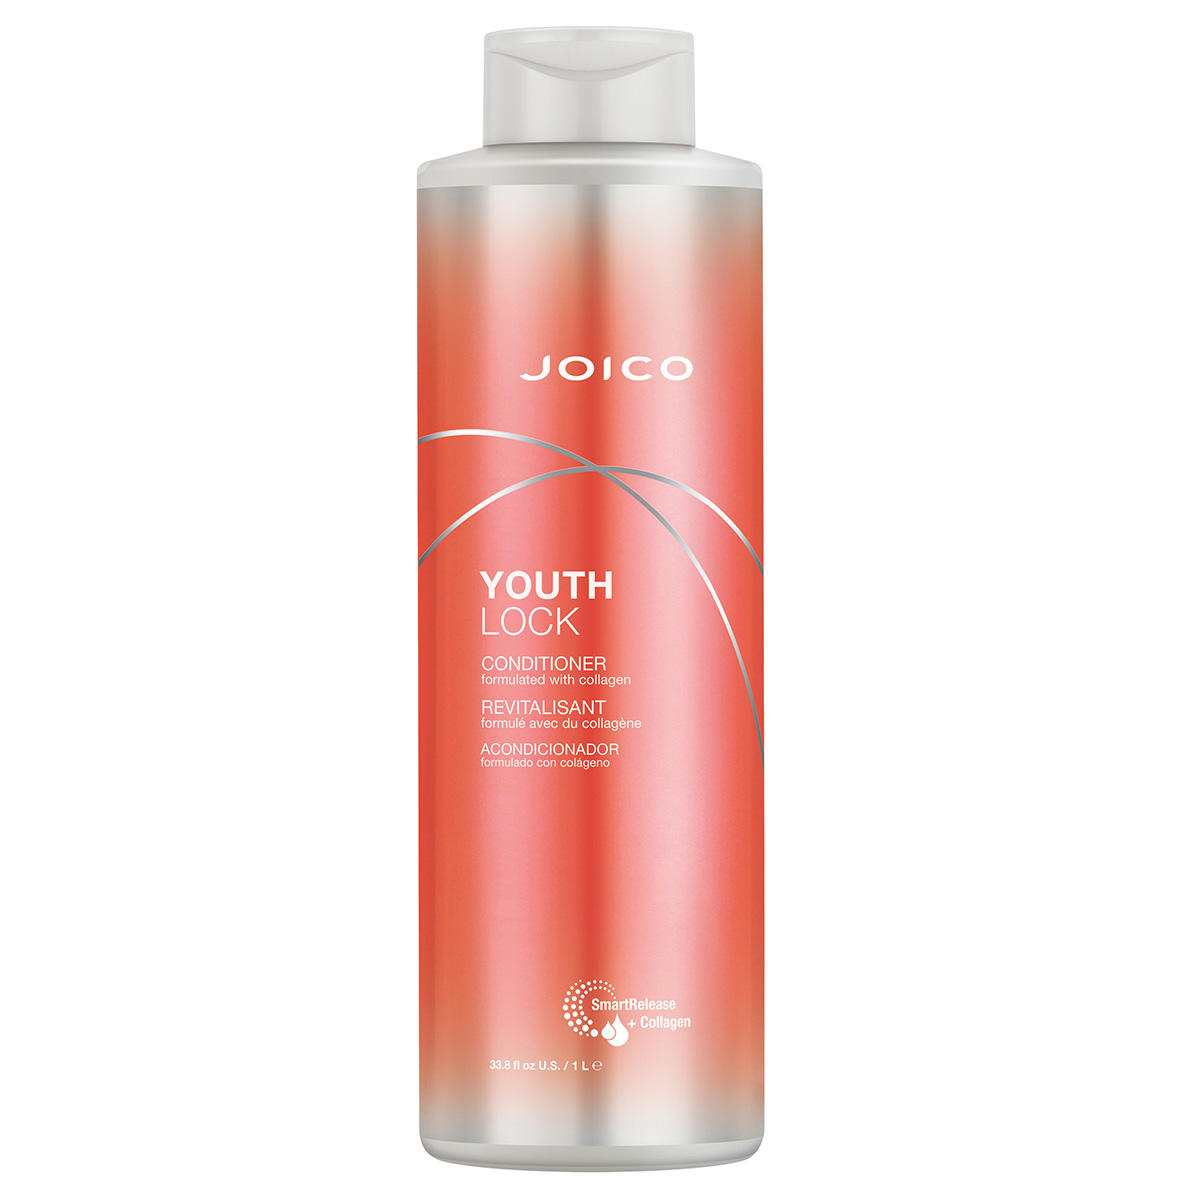 Joico Youthlock Conditioner 1 Liter